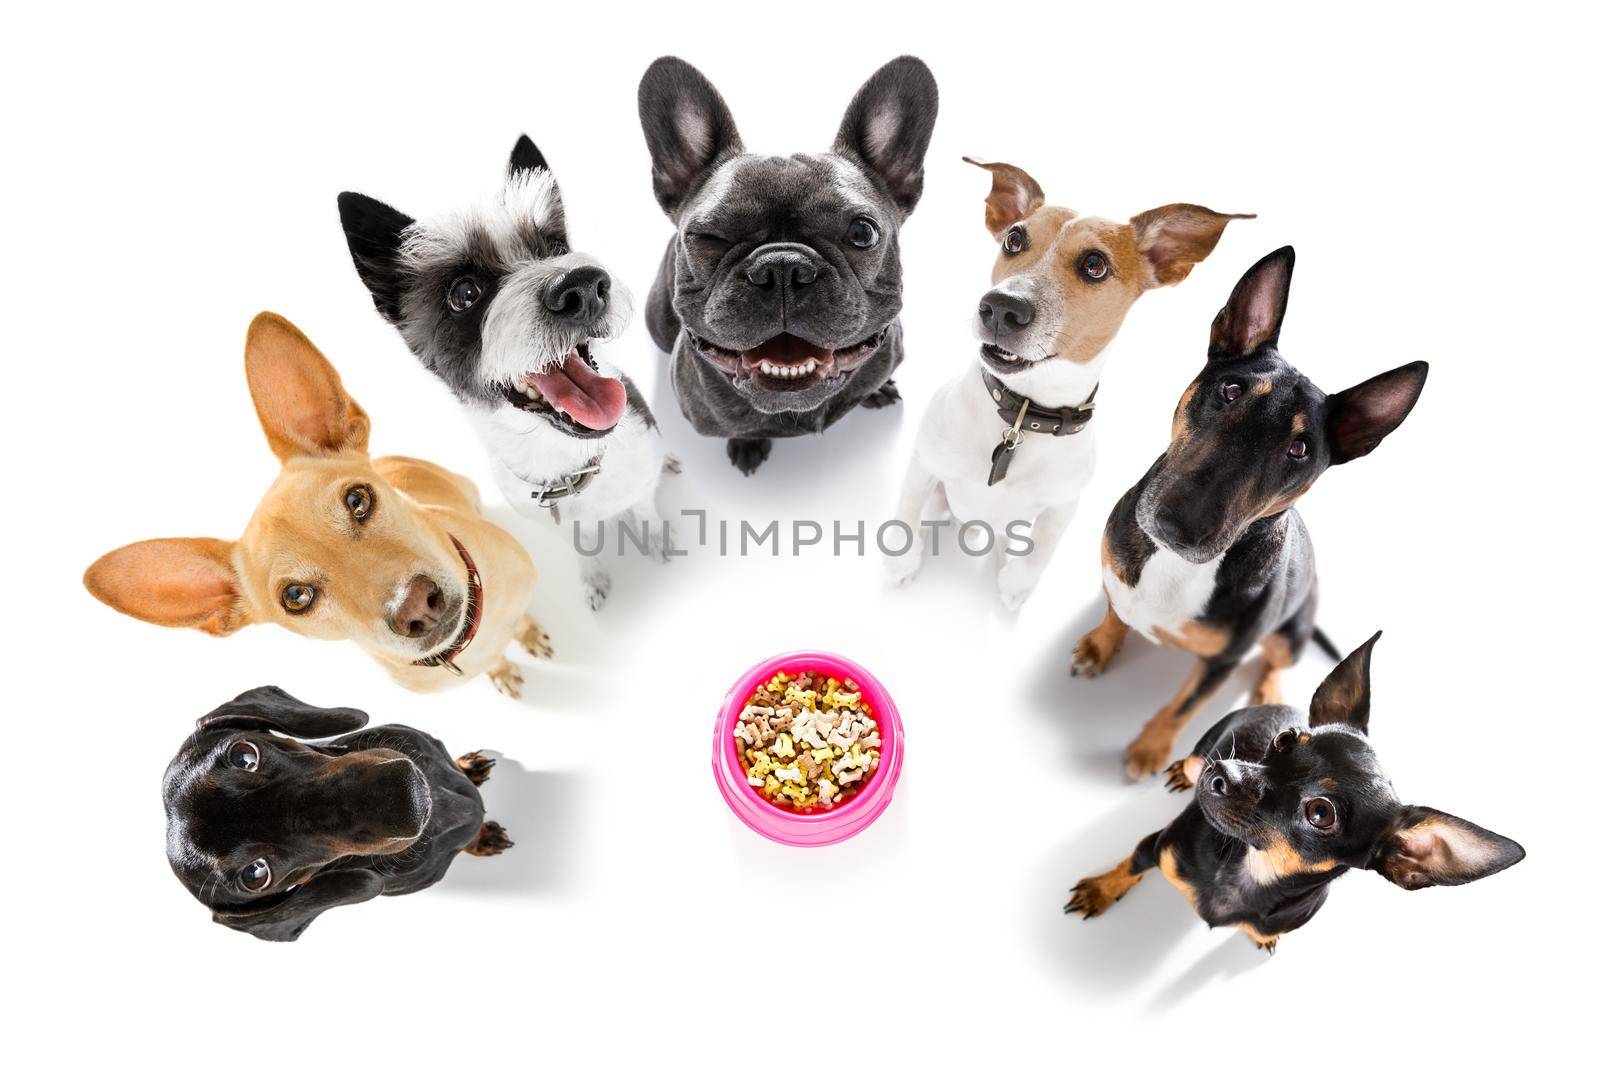 group of dogs taking selfie with smartphone by Brosch